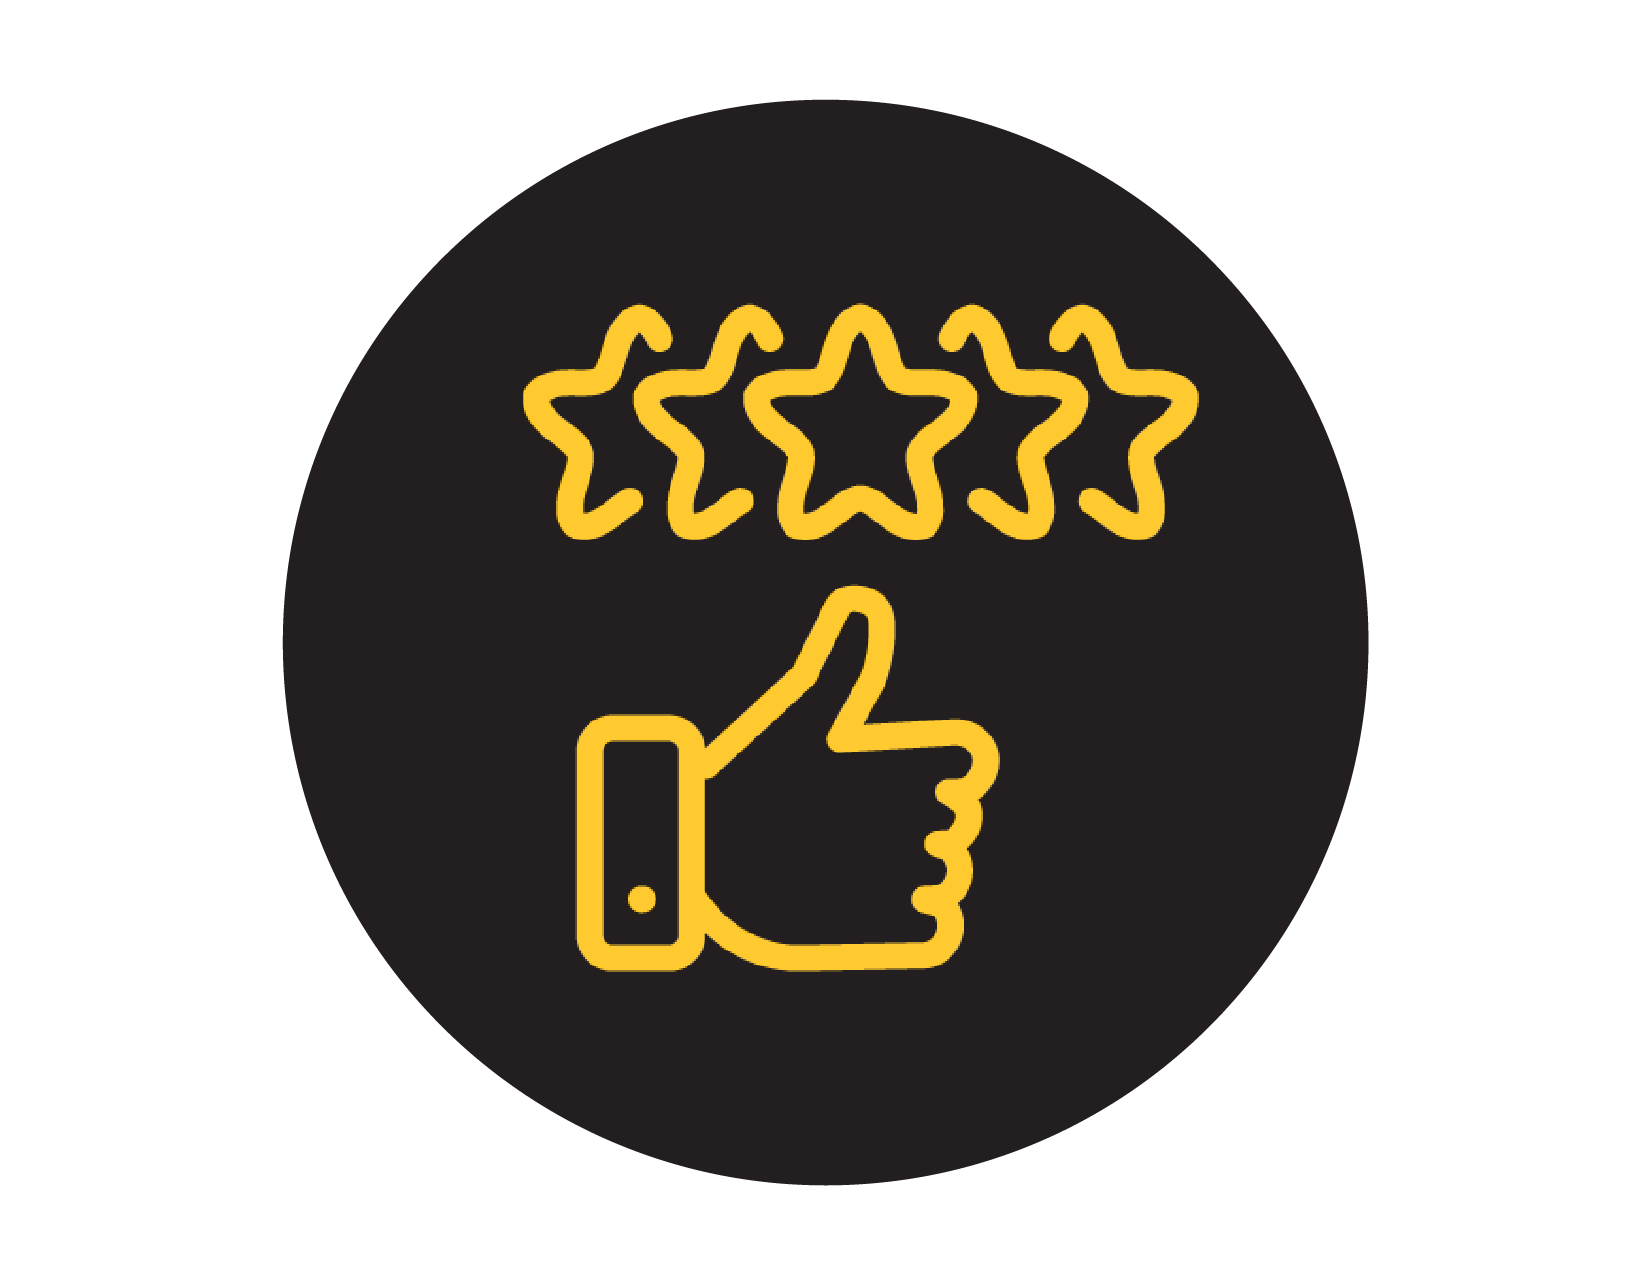 Thumbs up with five stars icon